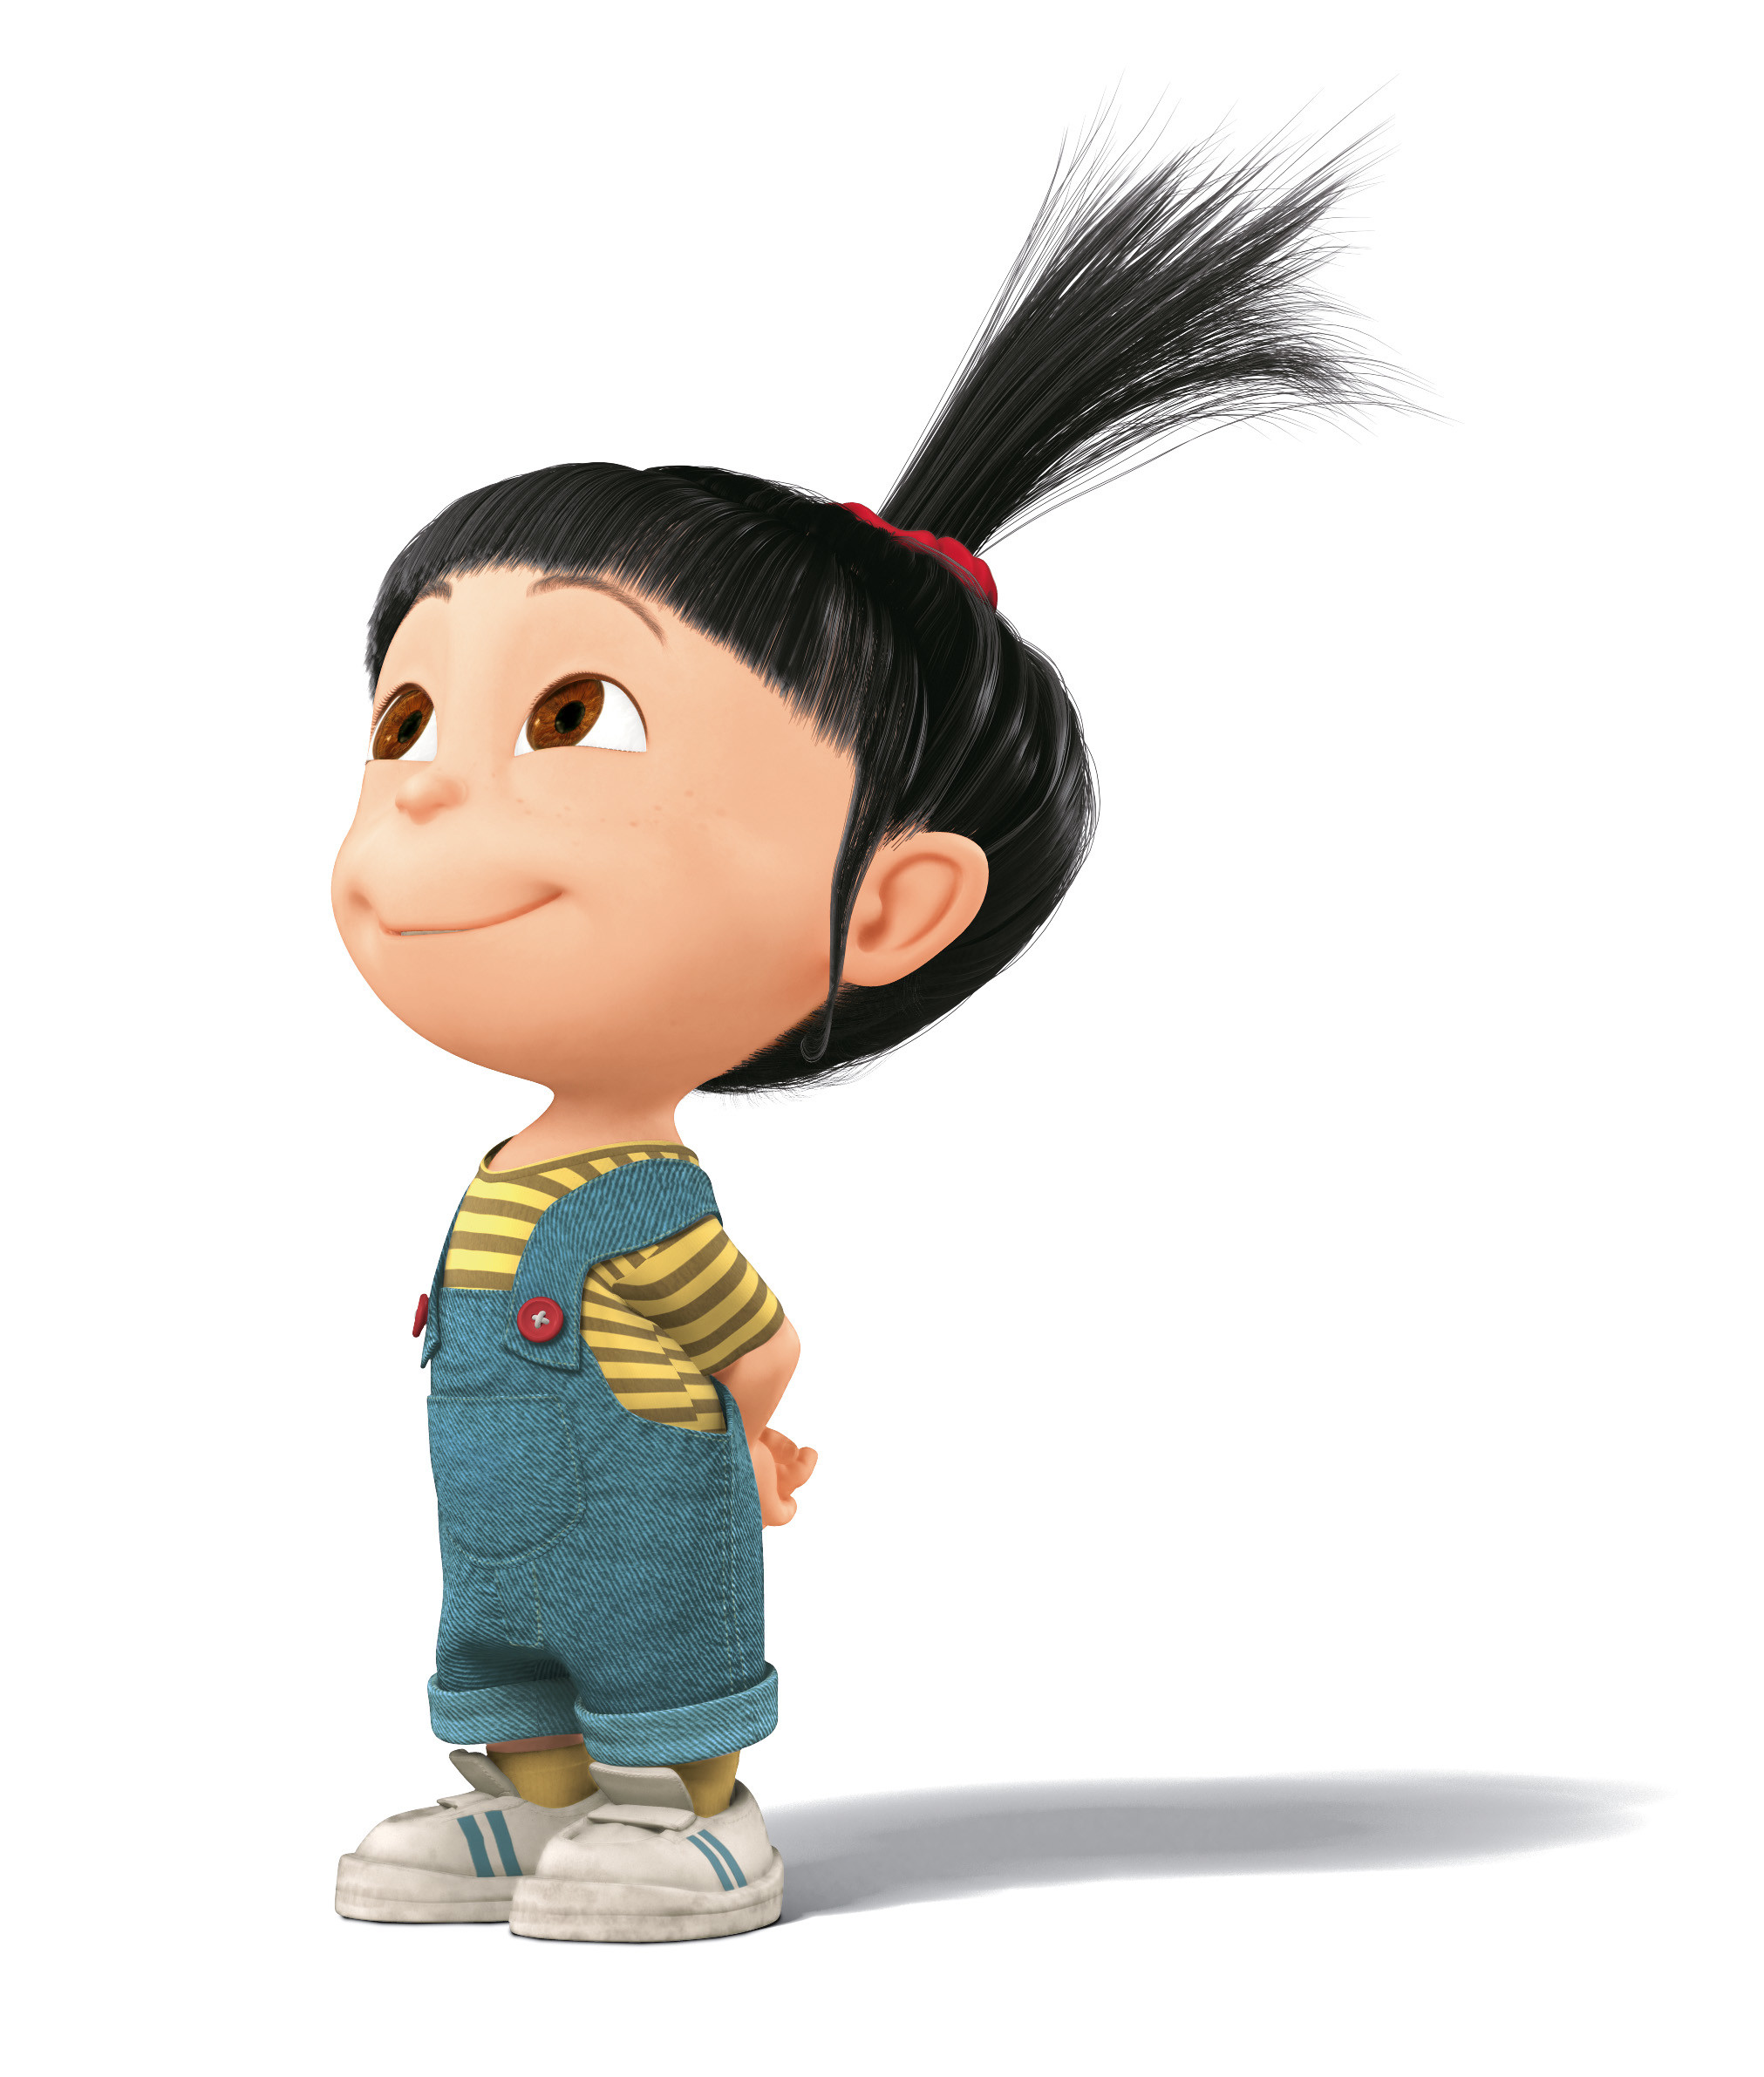 Despicable Me Image Agnes HD Wallpaper And Background Daughter Good Morning Daughter HD Wallpaper